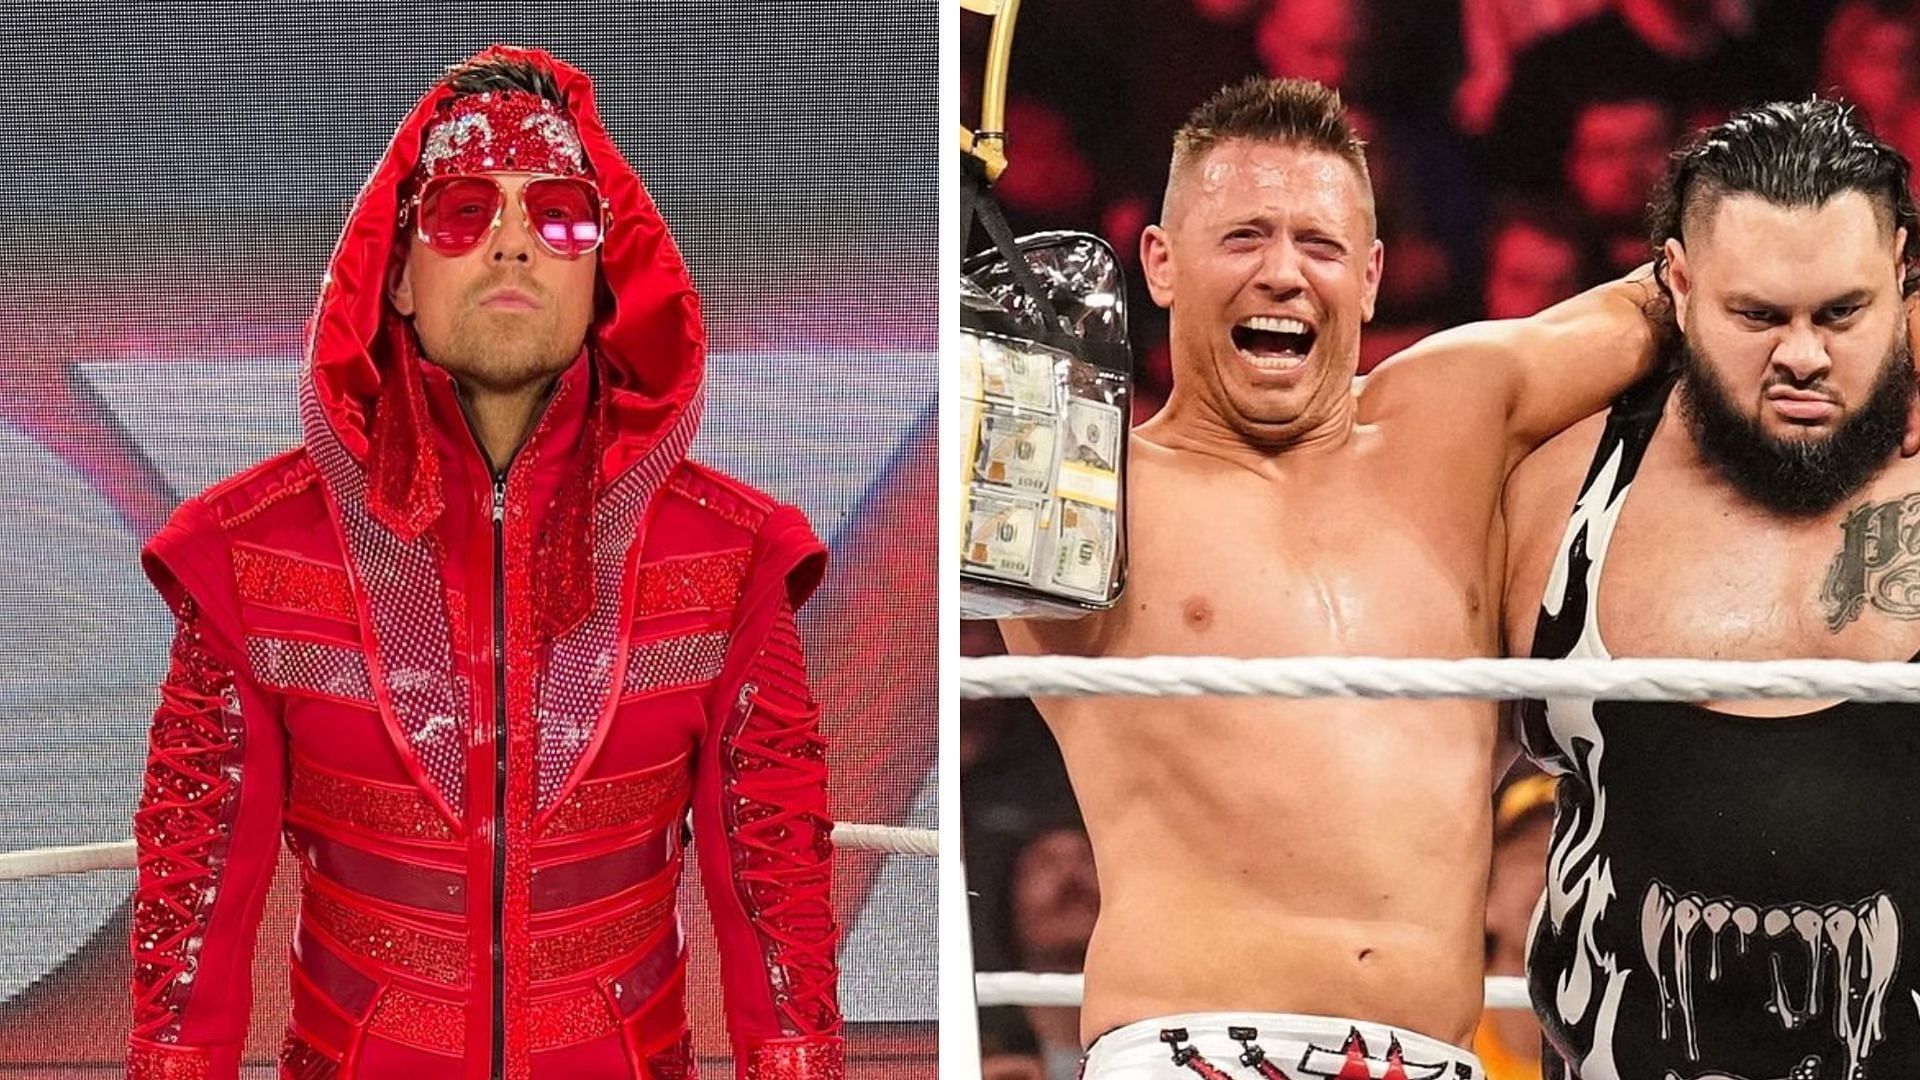 Bronson Reed recently returned to WWE and aligned with The Miz